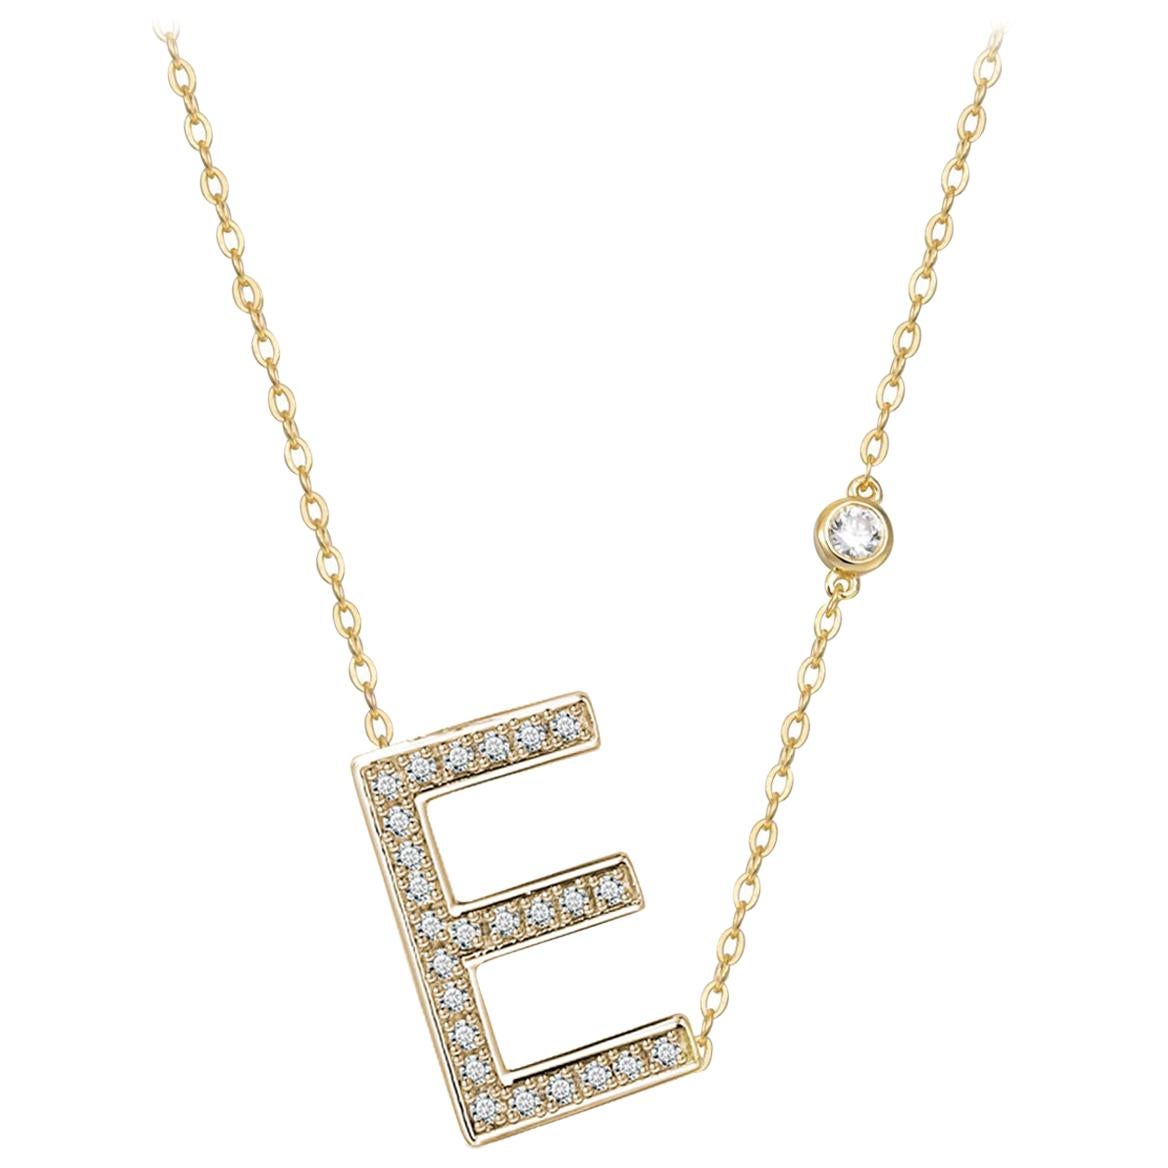 E Initial Bezel Chain Necklace For Sale